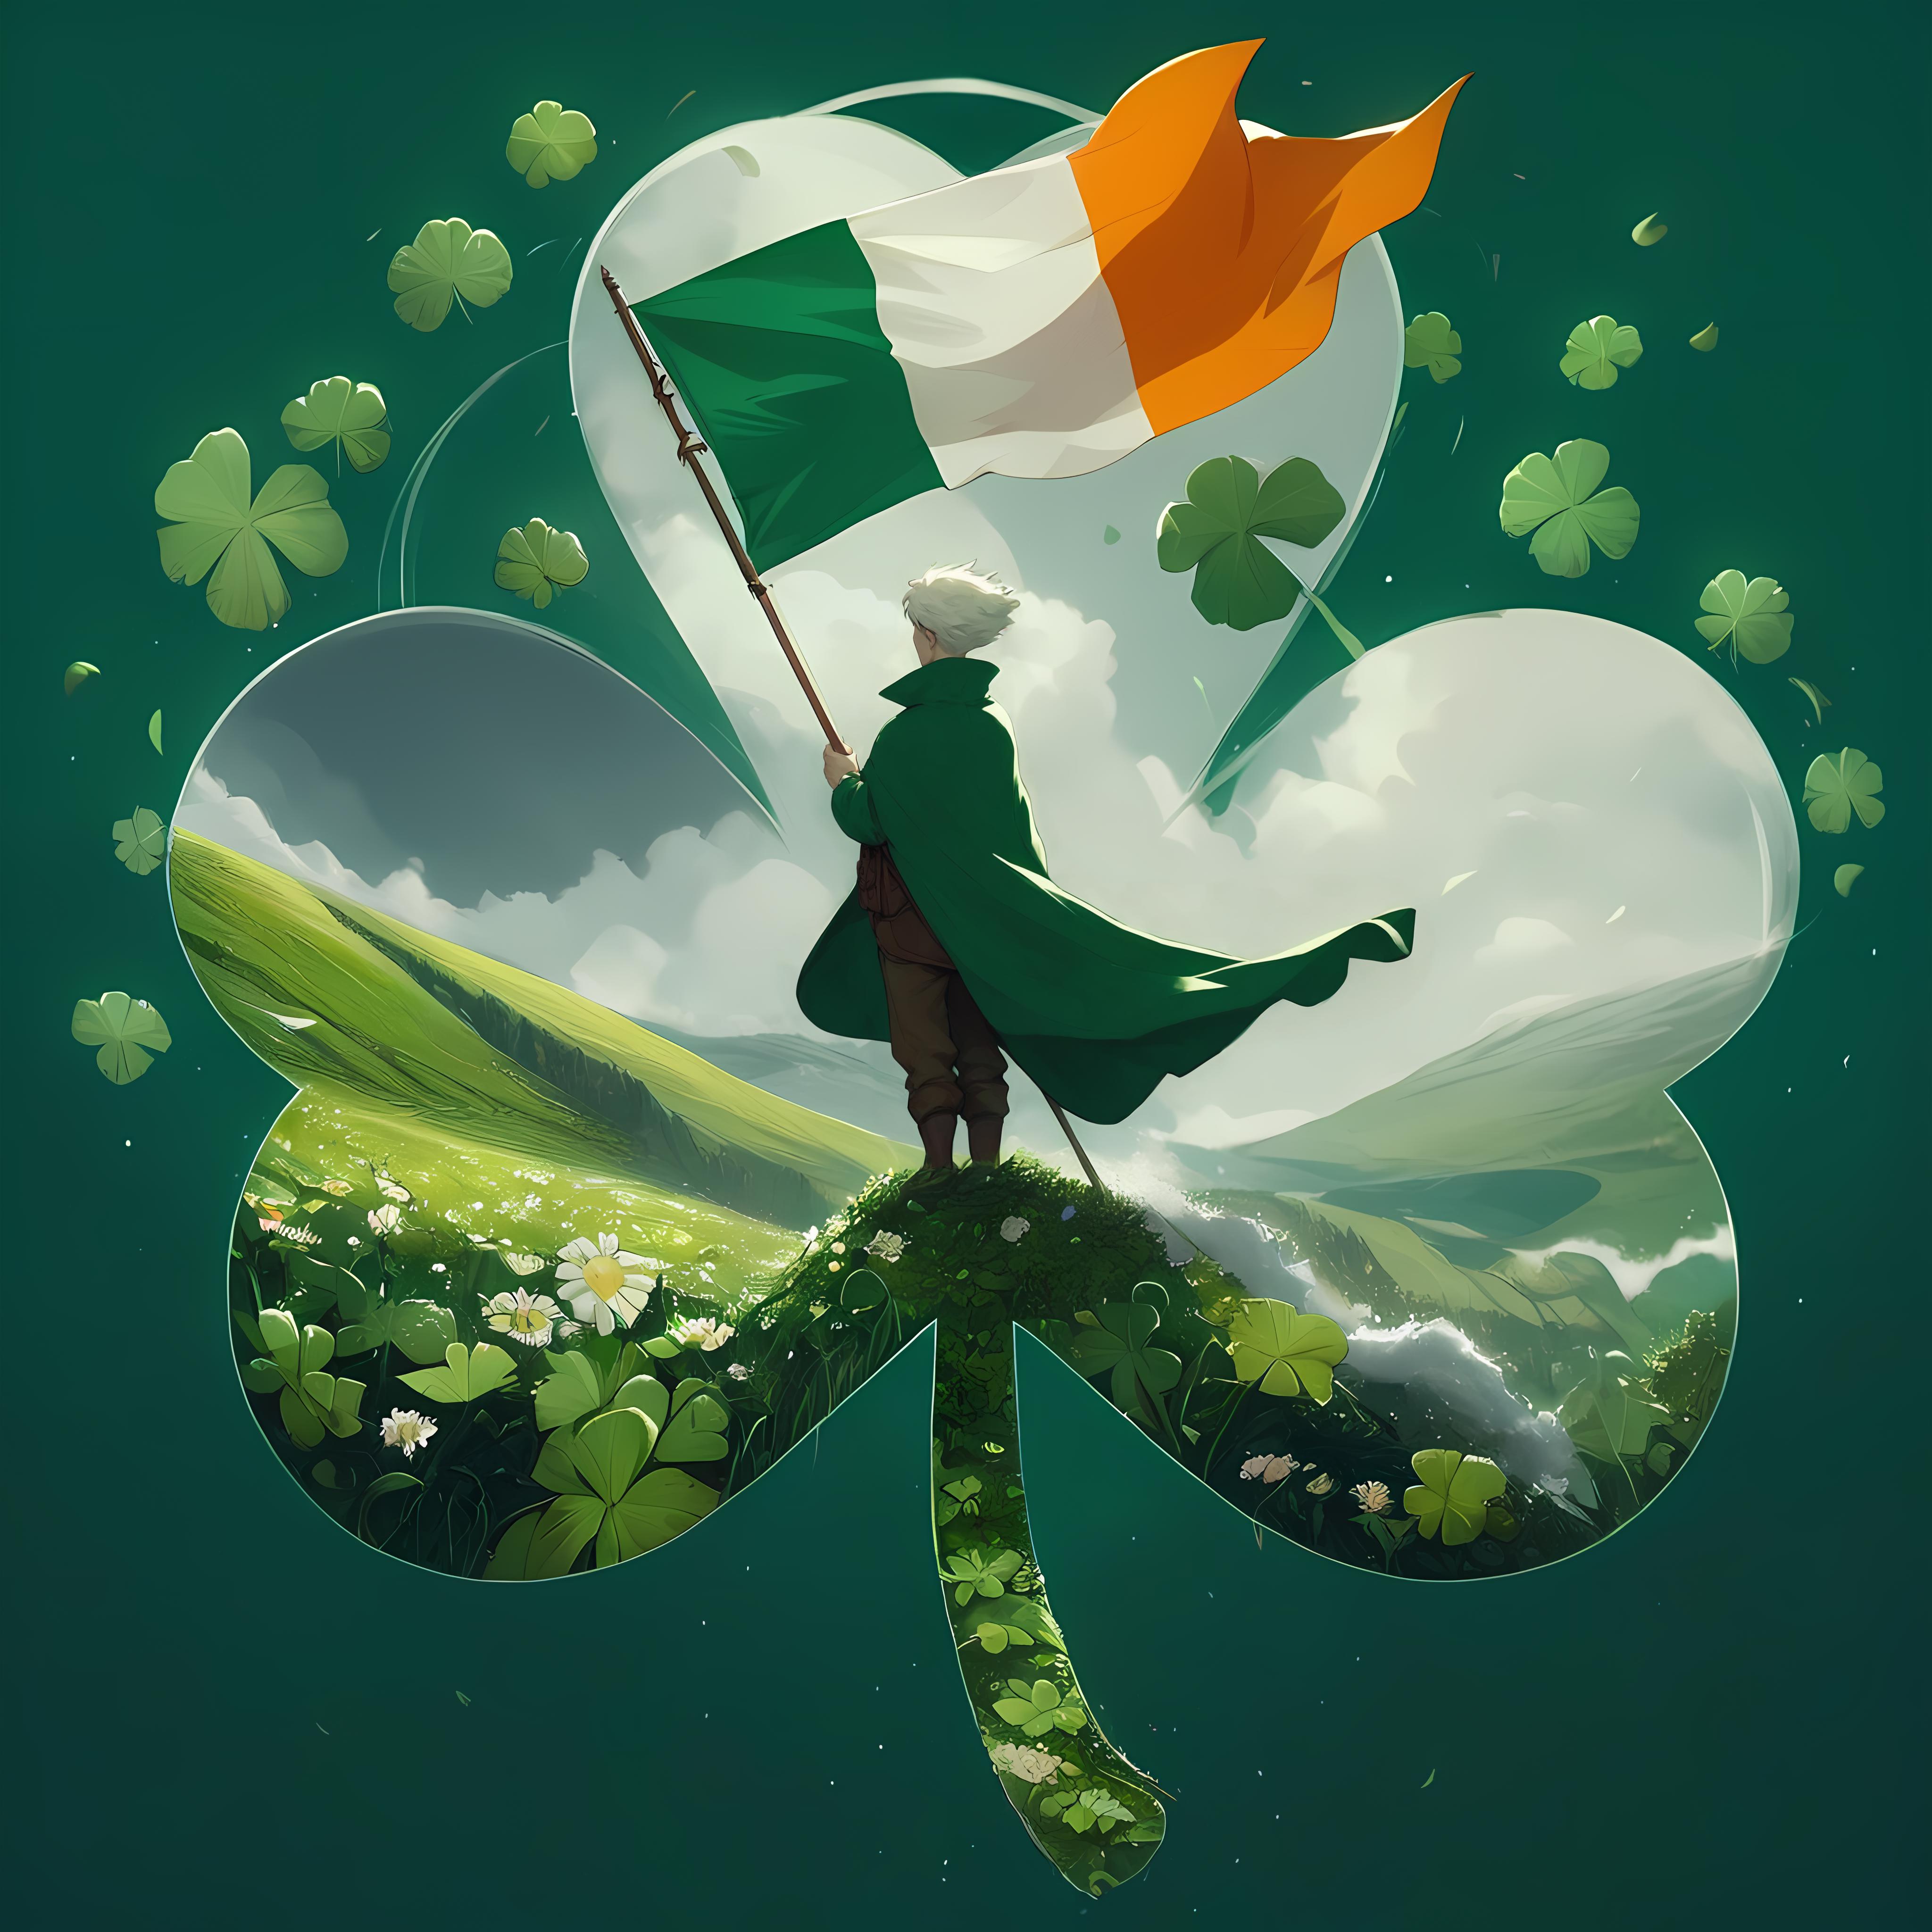 score_9, score_8_up, score_7_up, score_6_up, Saint Patrick in Ghibli style, green outfit <lora:Flag%20of%20Irland%20in%20G...